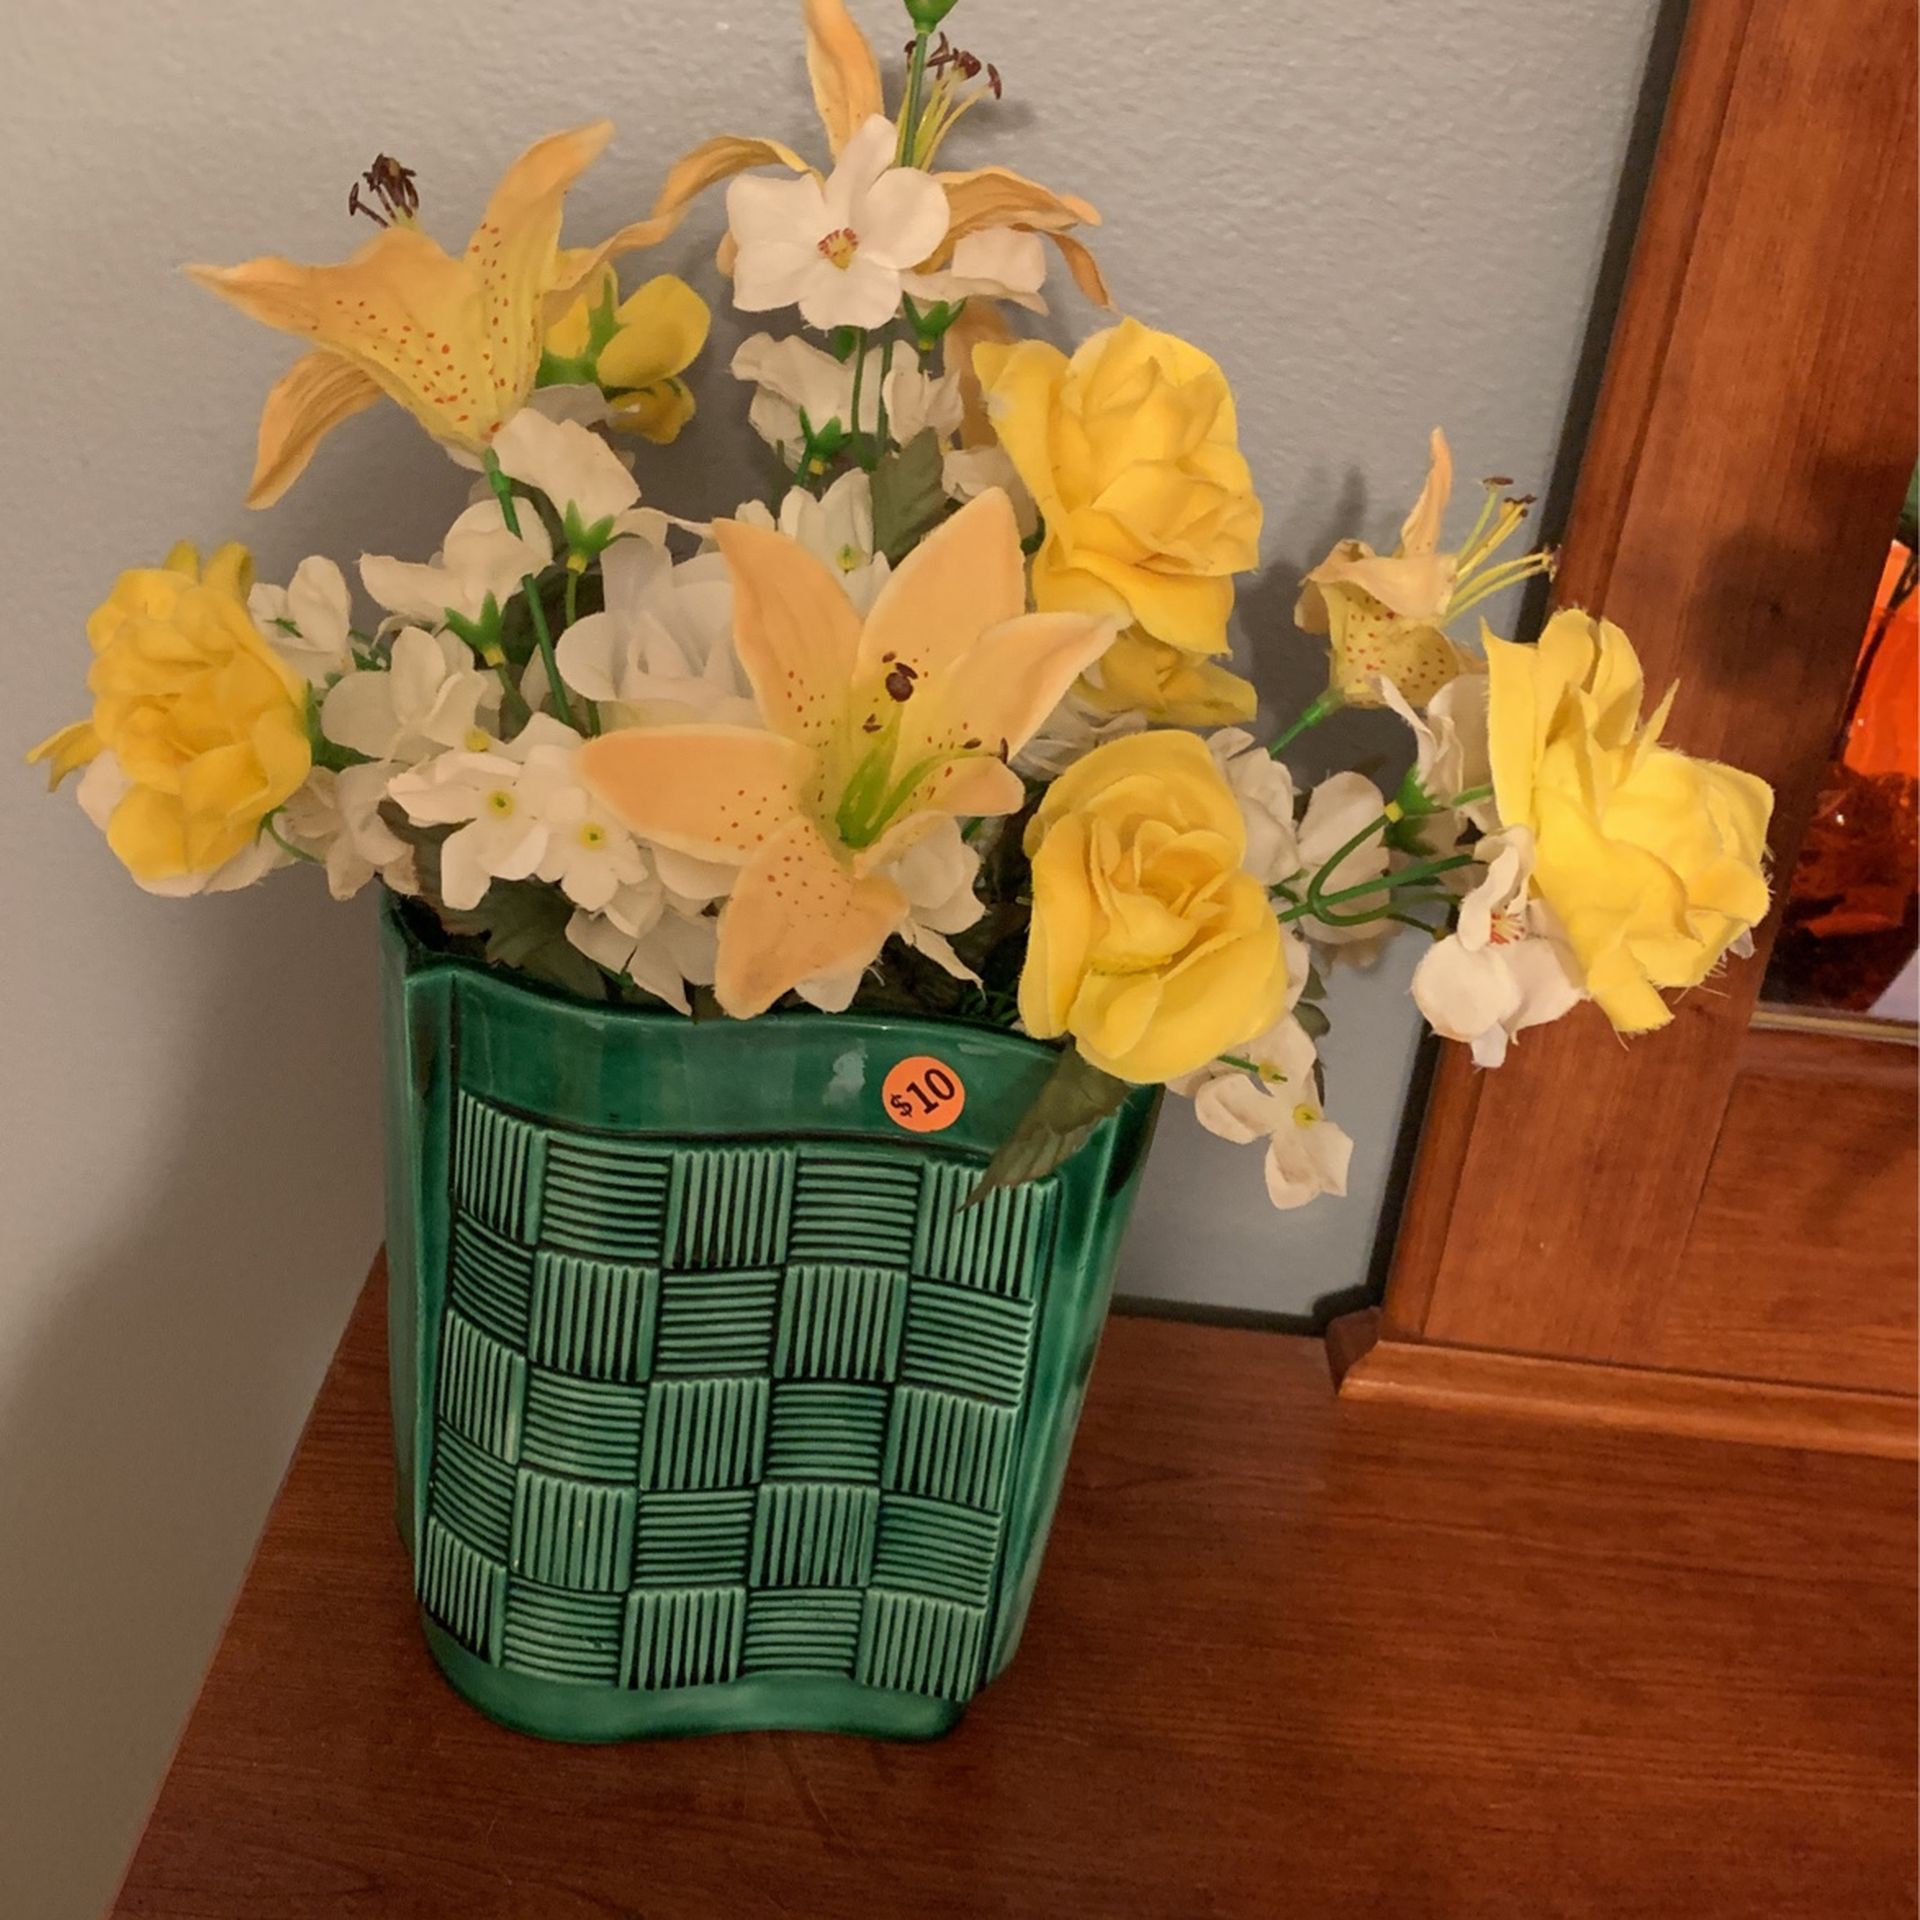 Vintage Green Vase With beautiful Yellow & White Flowers. Very nice vase With flowers Only $10.00